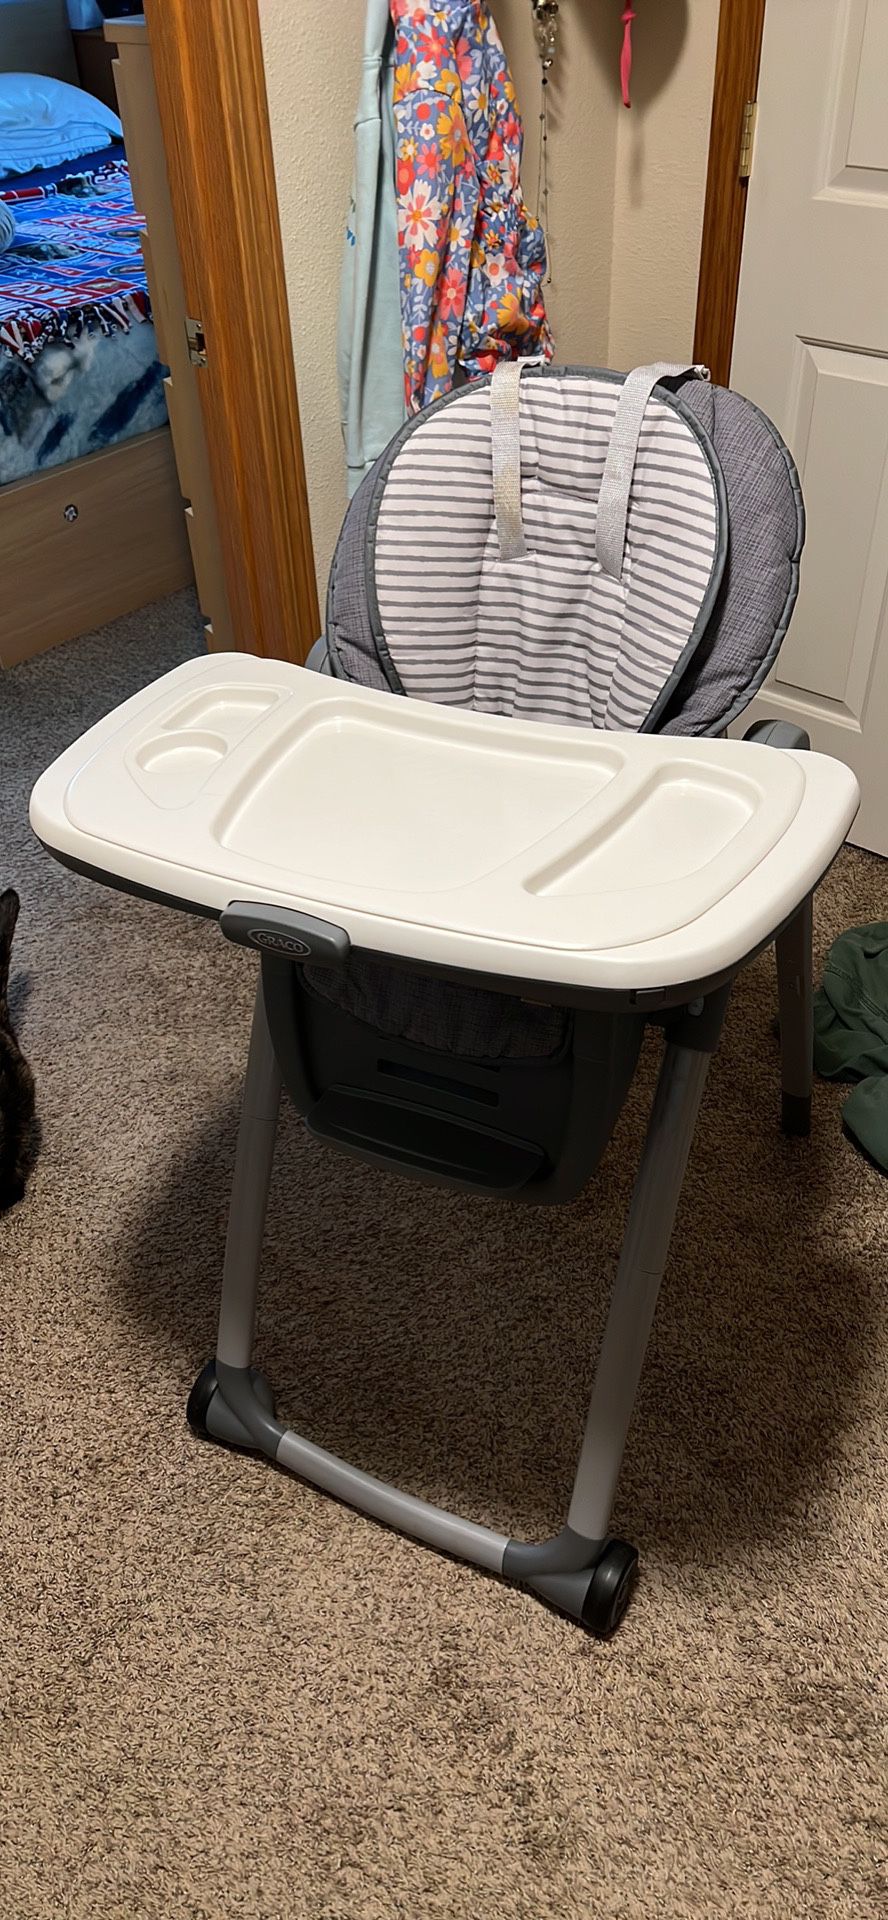 Graco 7 in 1 High Chair